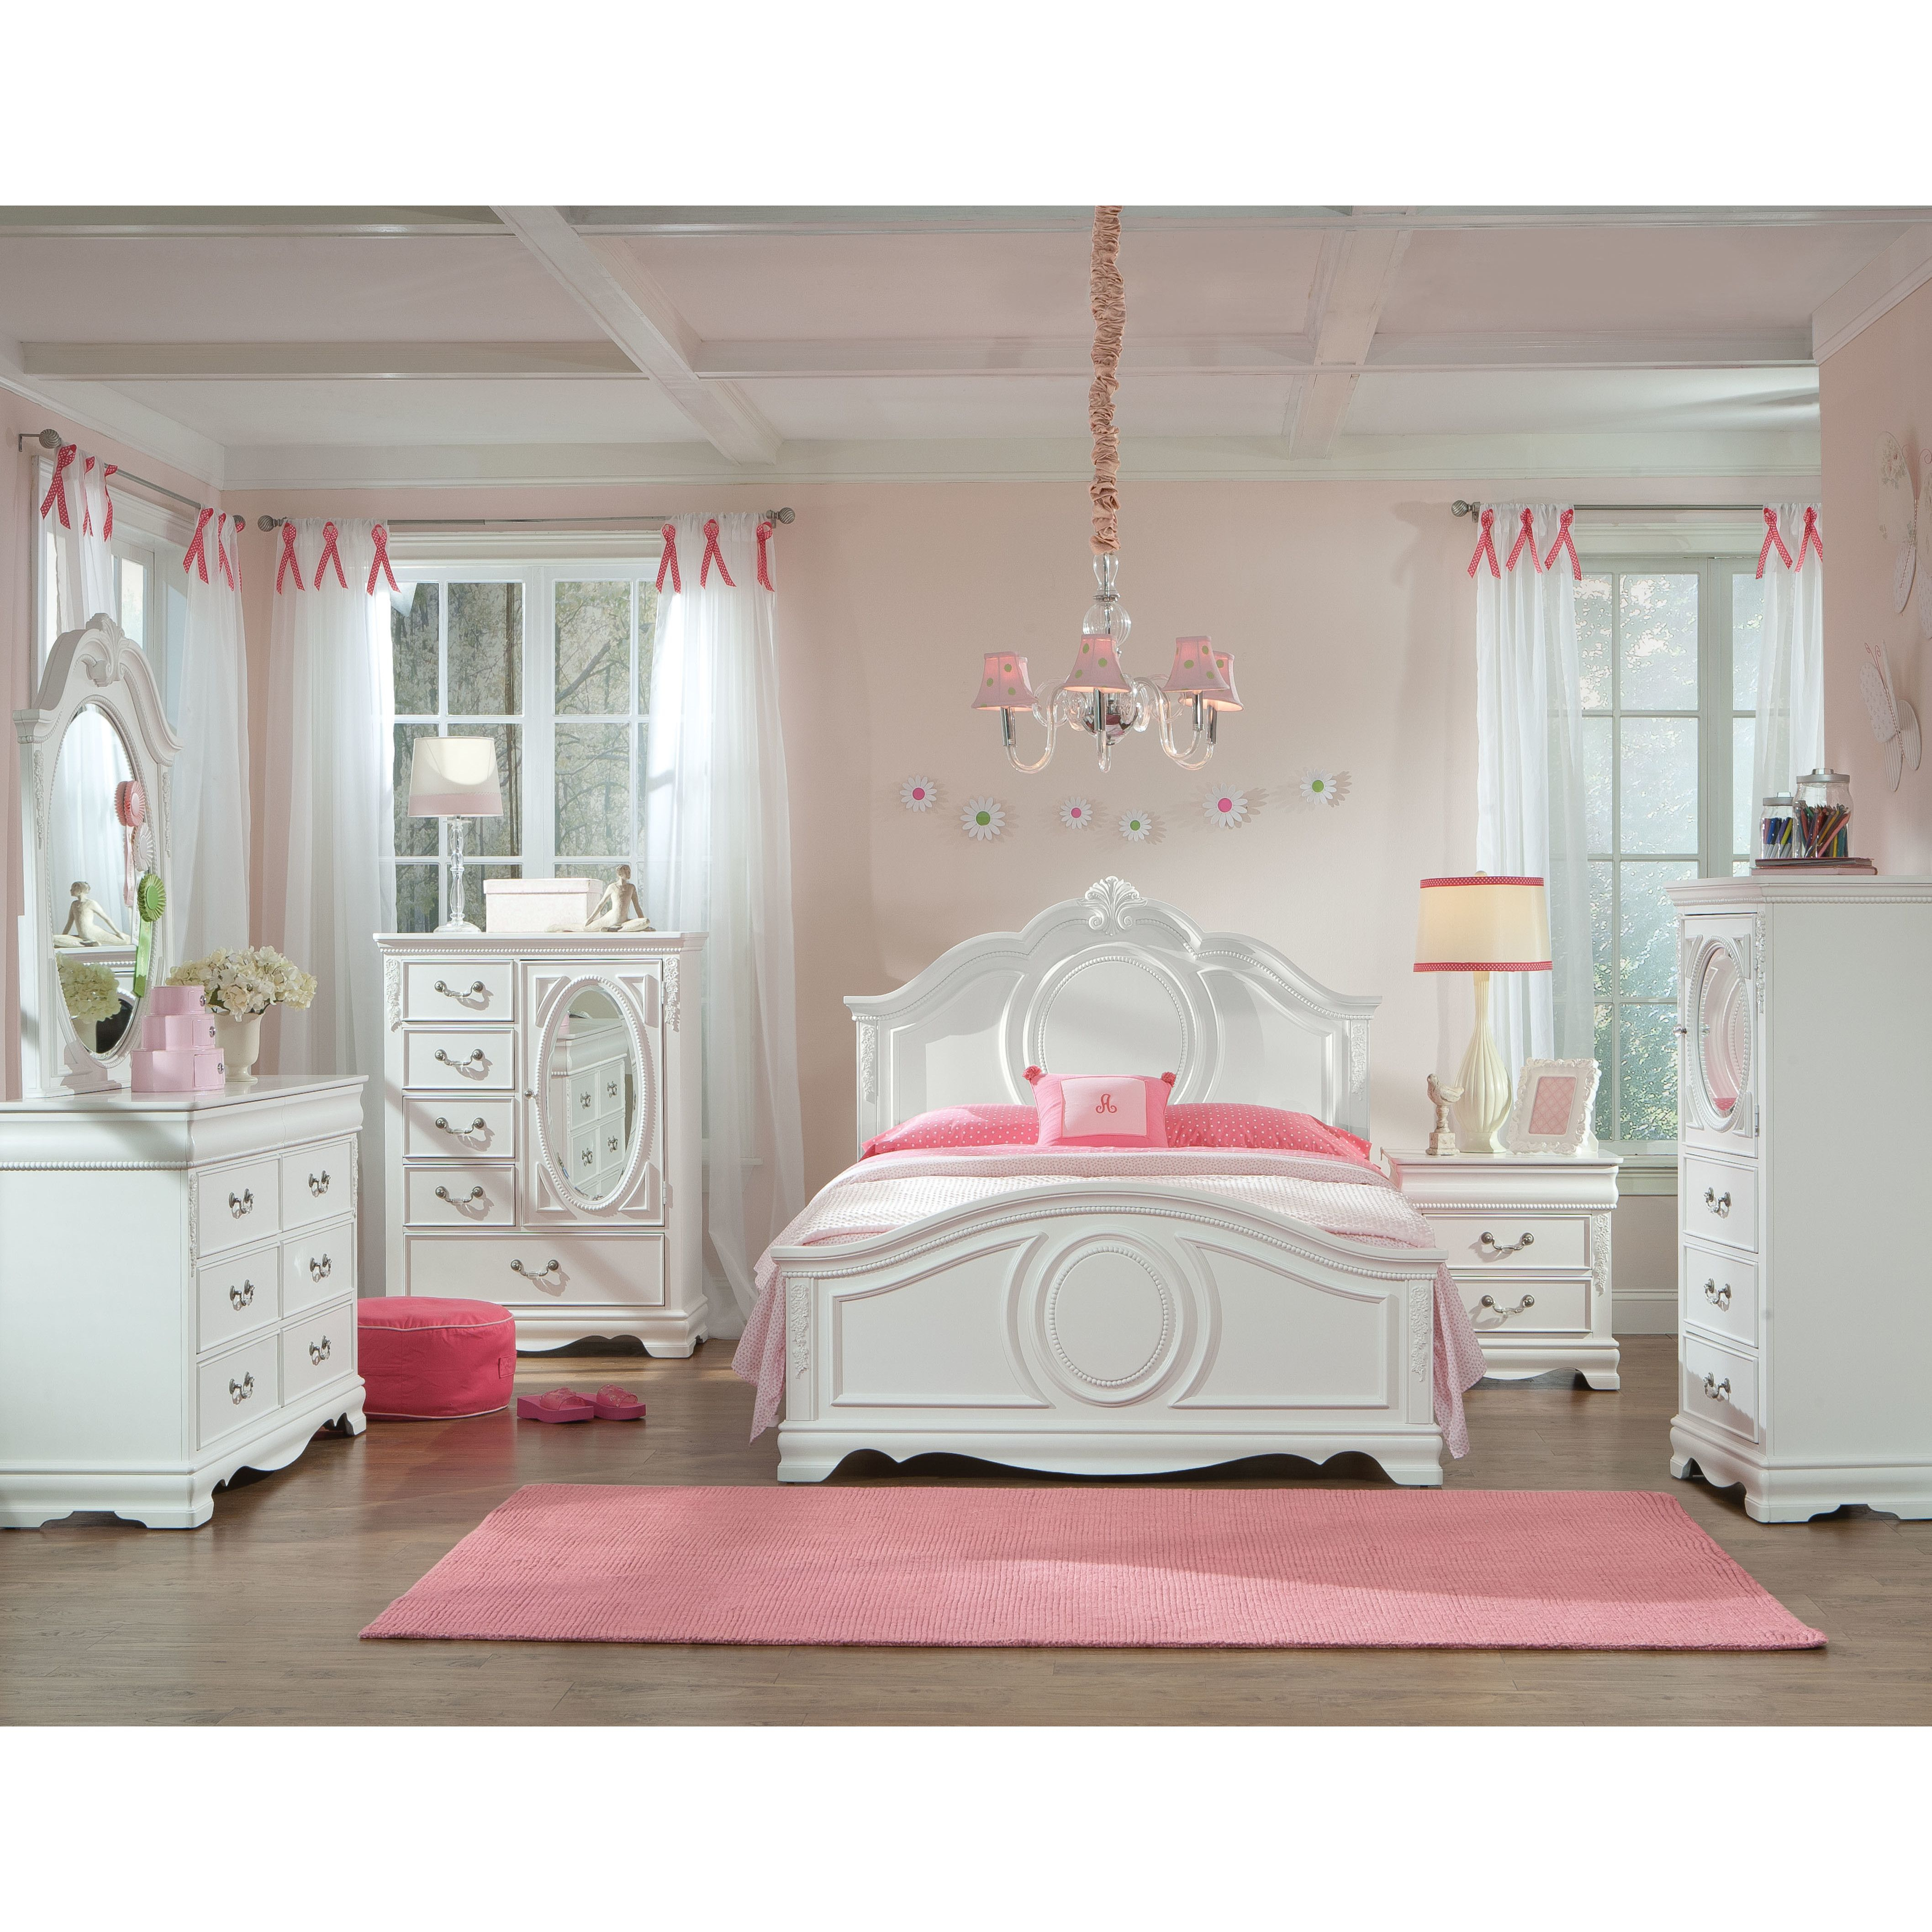 Incredible Brilliant Full Bedroom Sets For Girls Learning Tower With with dimensions 4230 X 4230